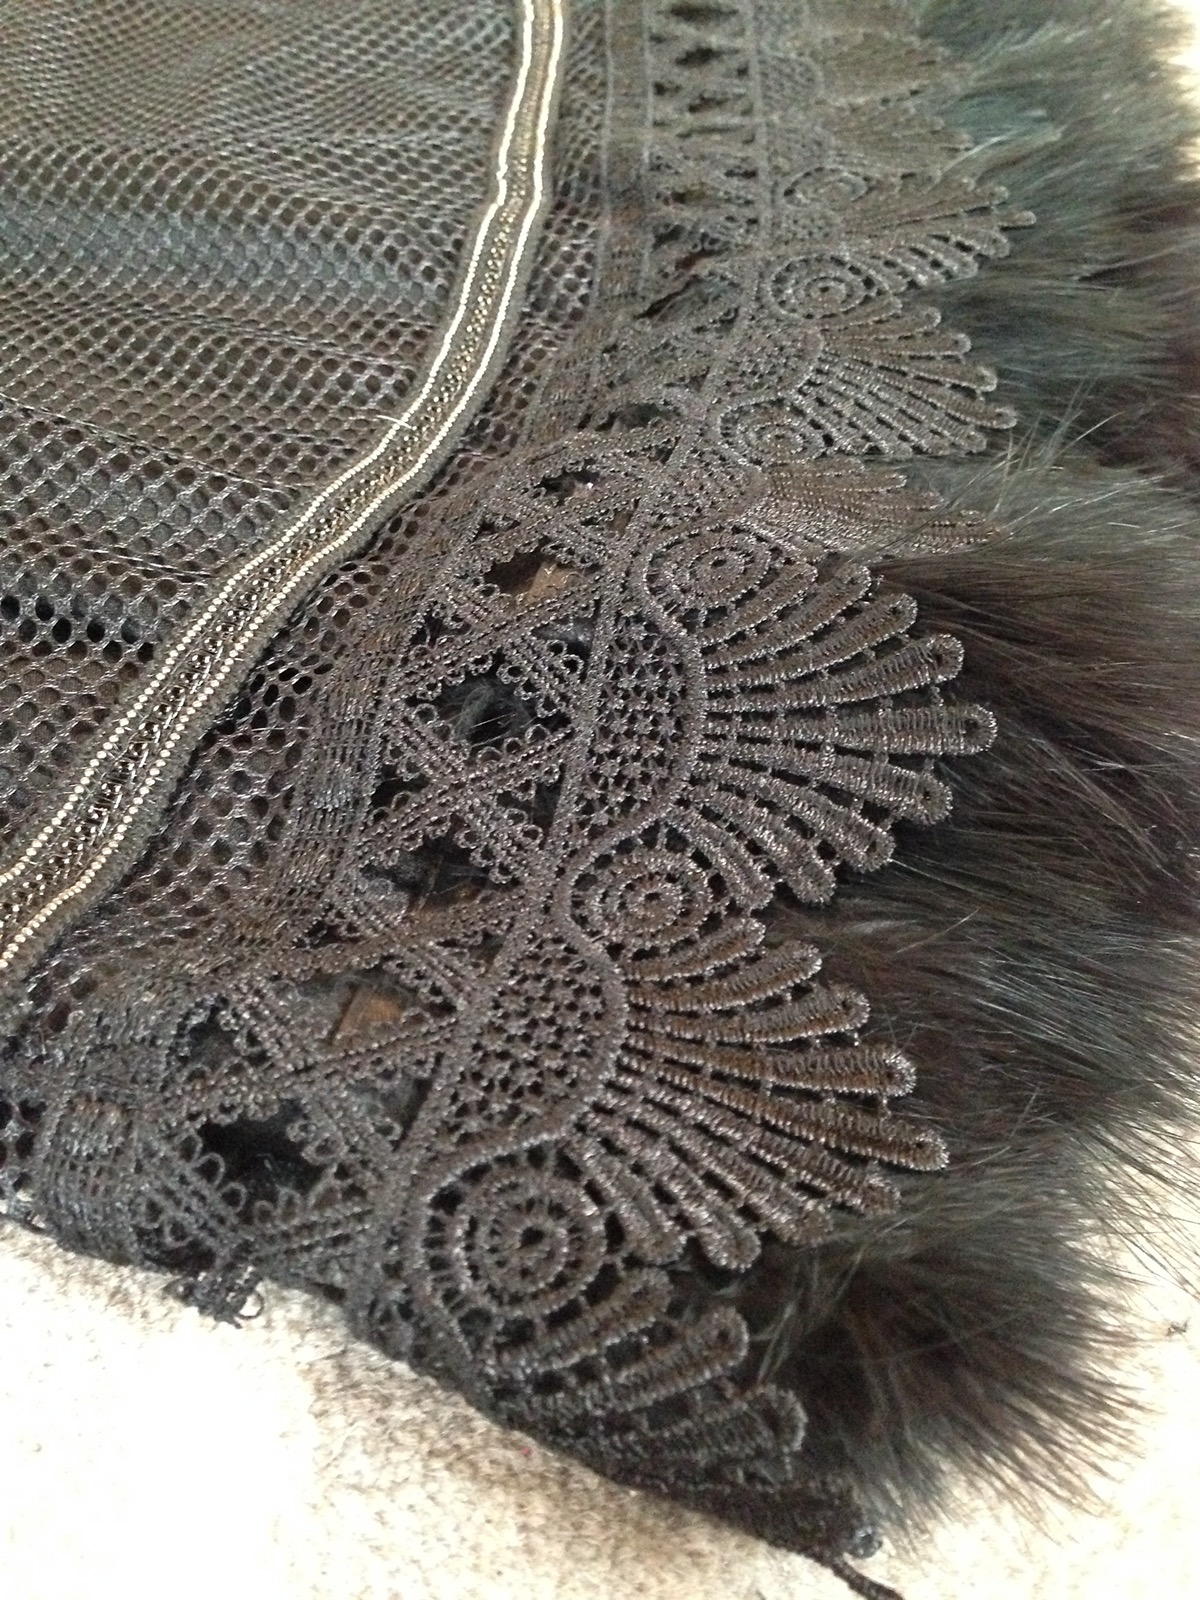 lace feathers mesh design fashion design fashion blogging sewing new years eve Patterning designing making a dress custom design custom made just for me styling 